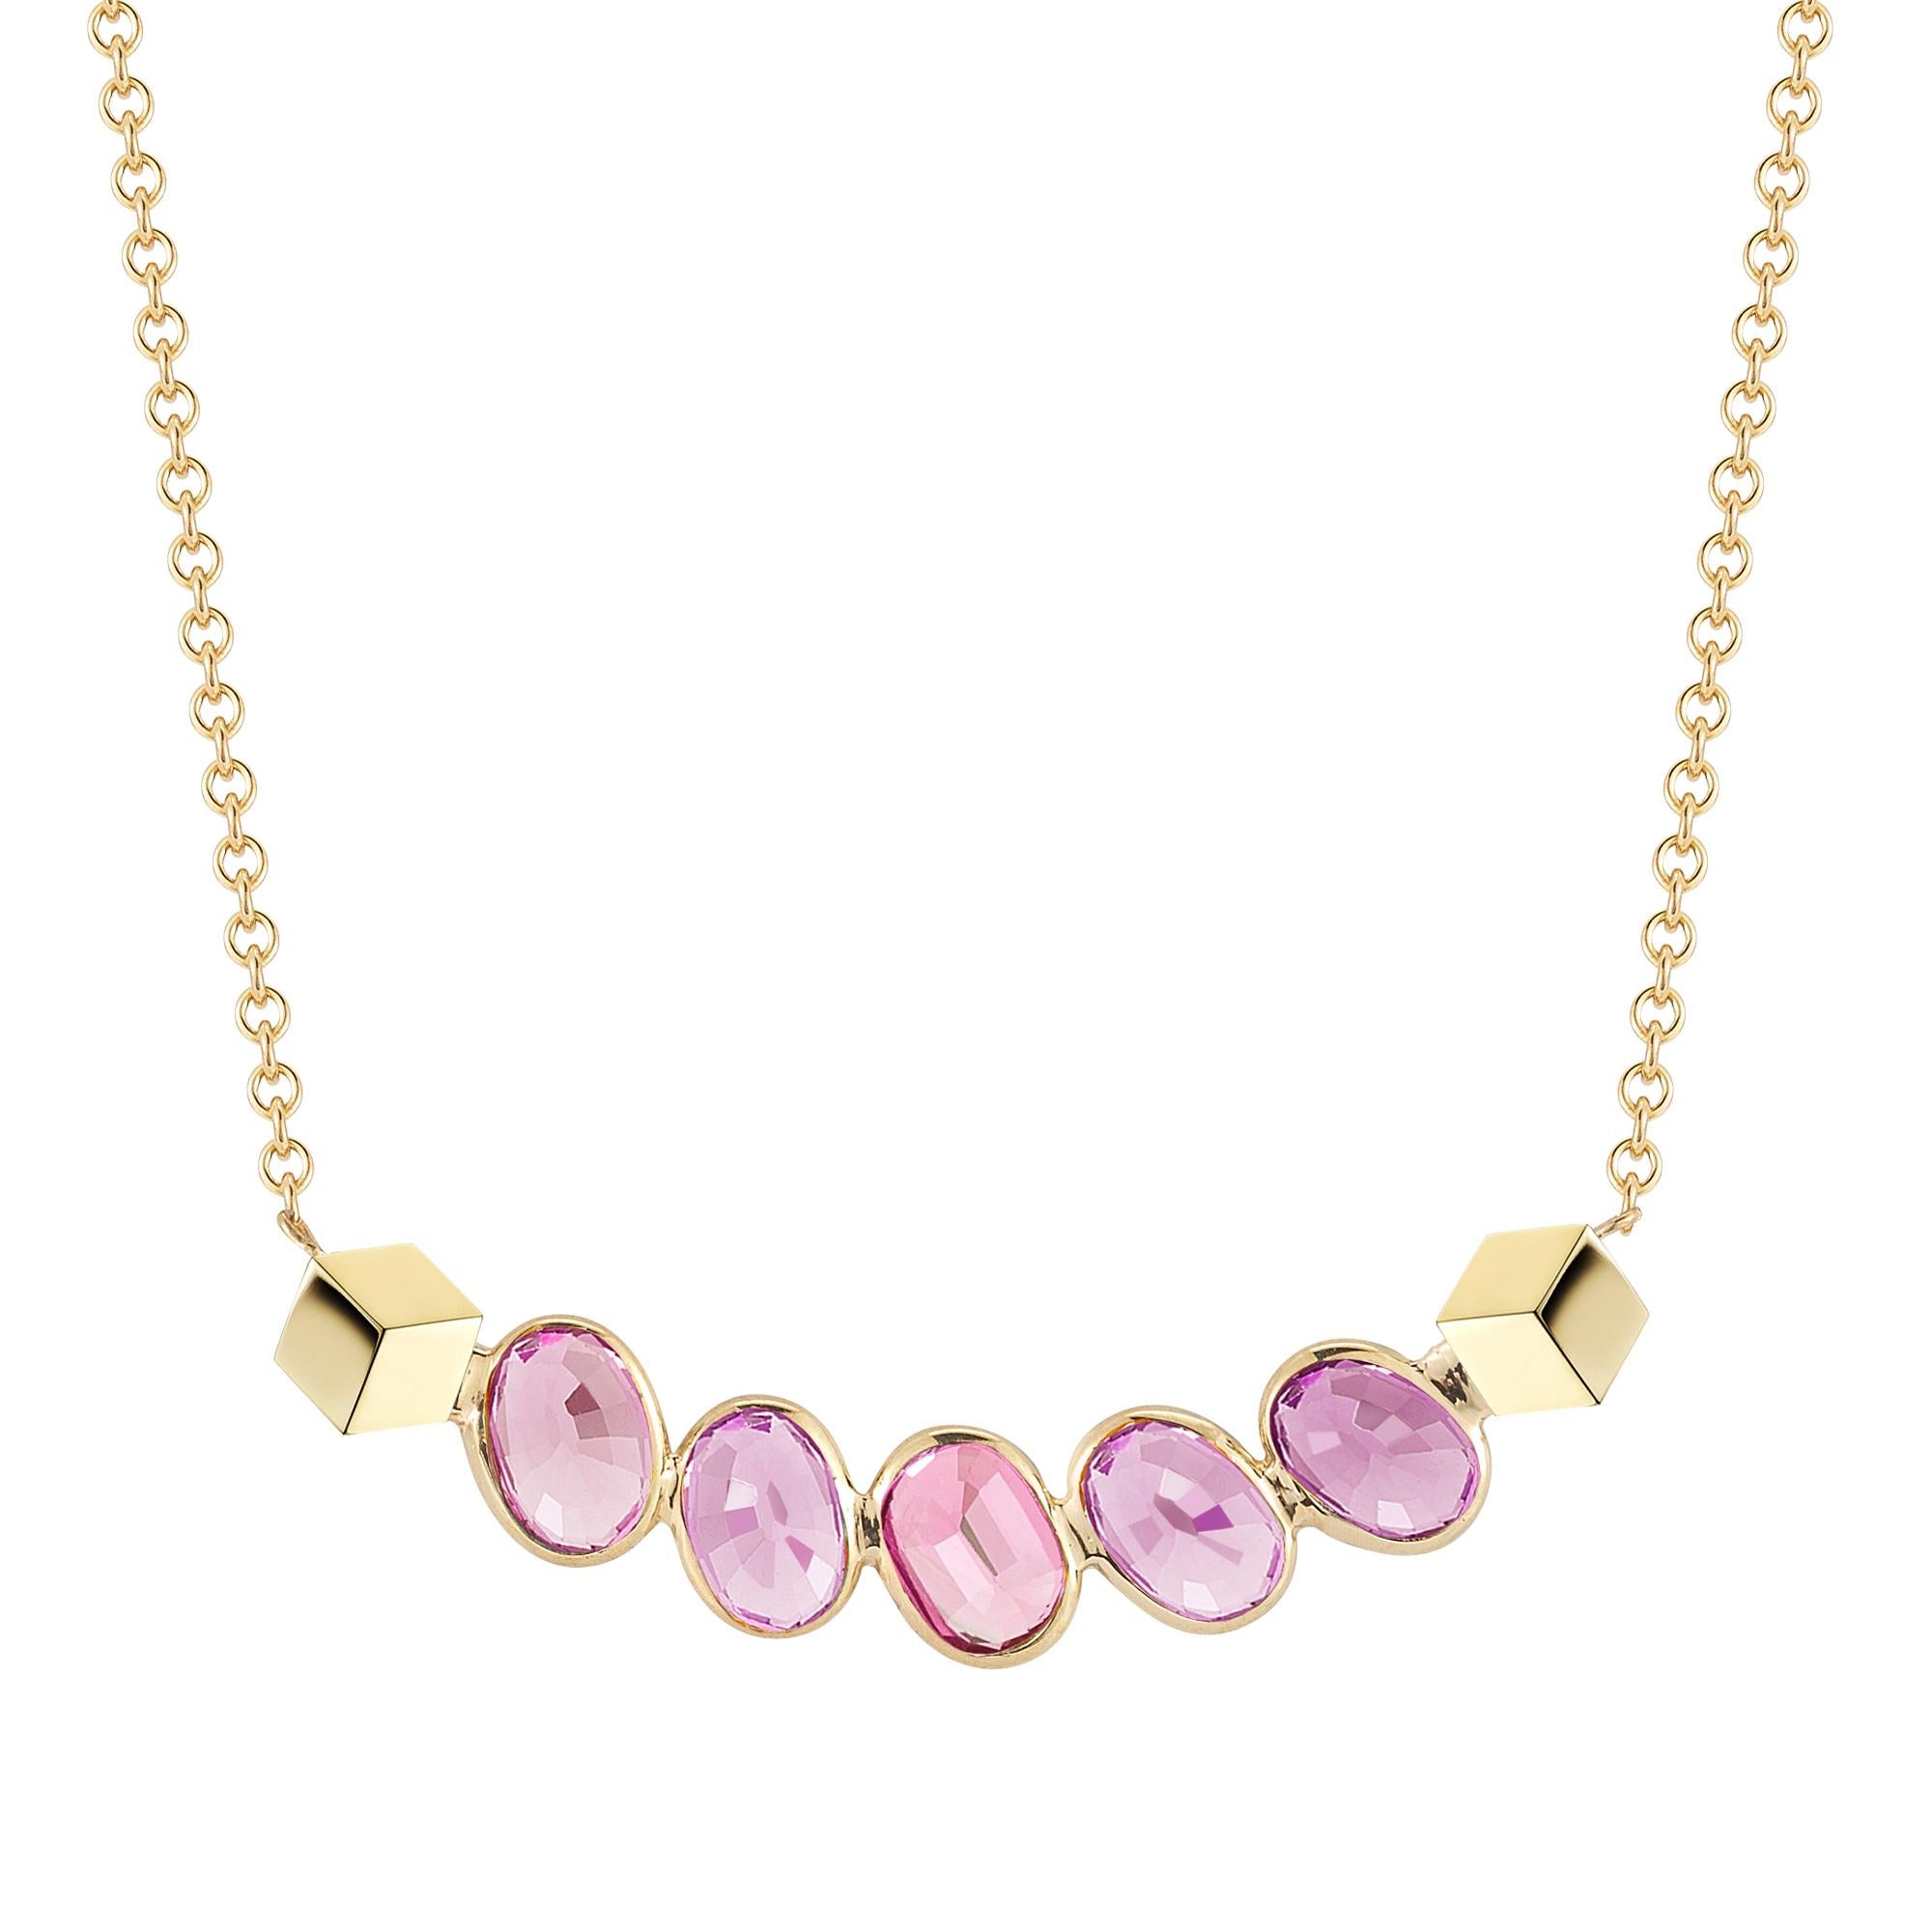 Paolo Costagli 18kt Yellow Gold Pink Sapphire, 2.91 Carat Ombré Pendant Necklace For Sale